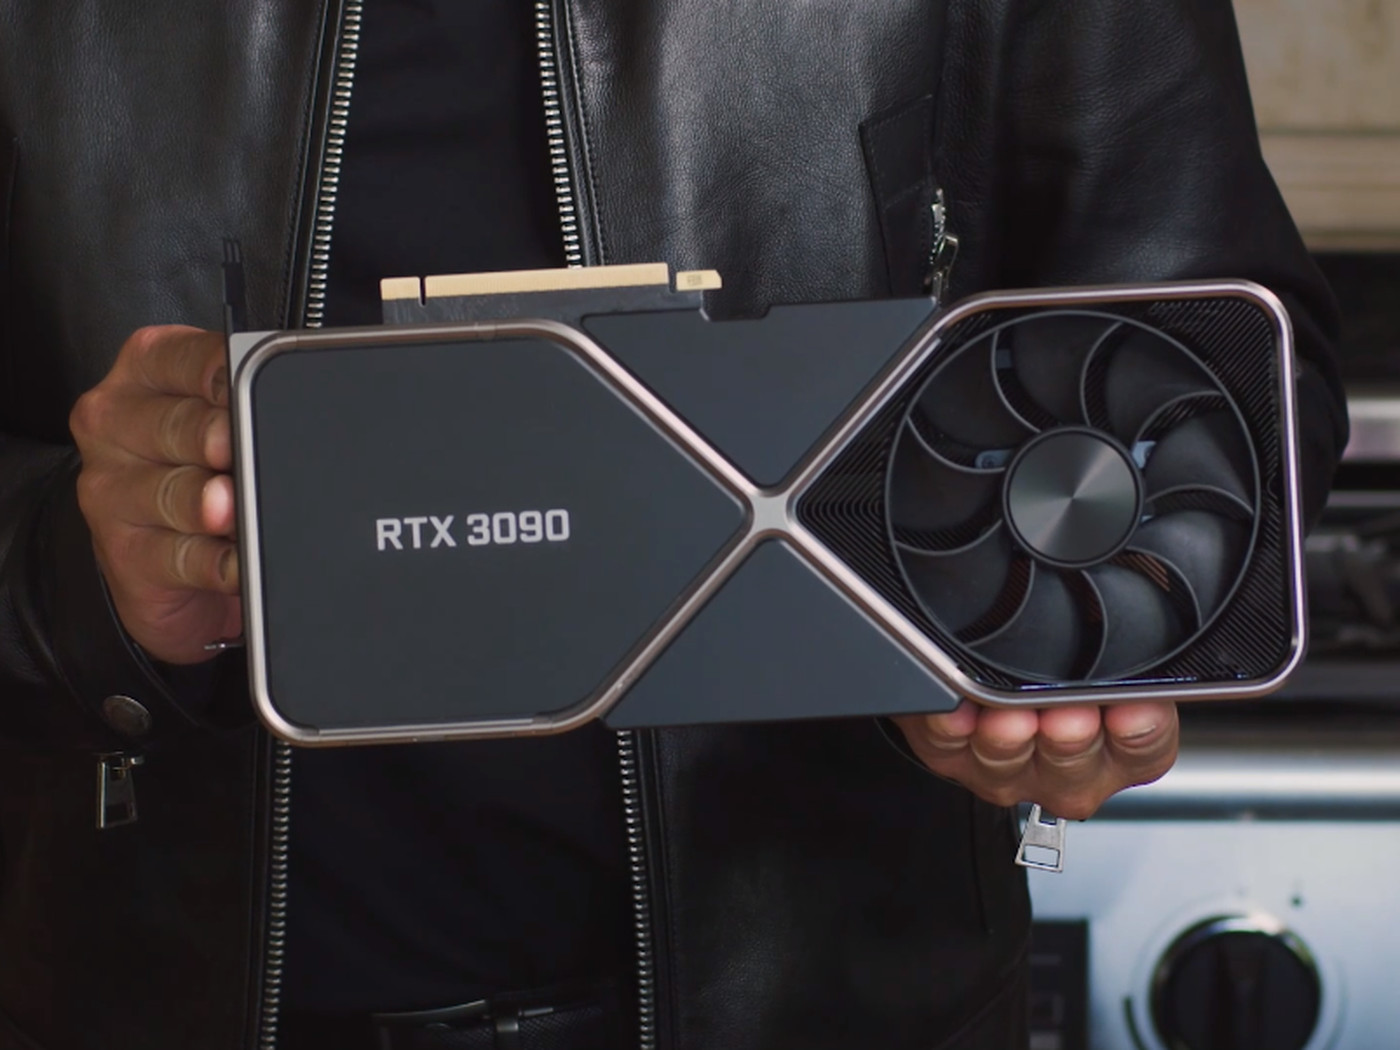 Nvidia's new RTX 3090 is a $1,499 monster GPU for 8K gaming - The Verge